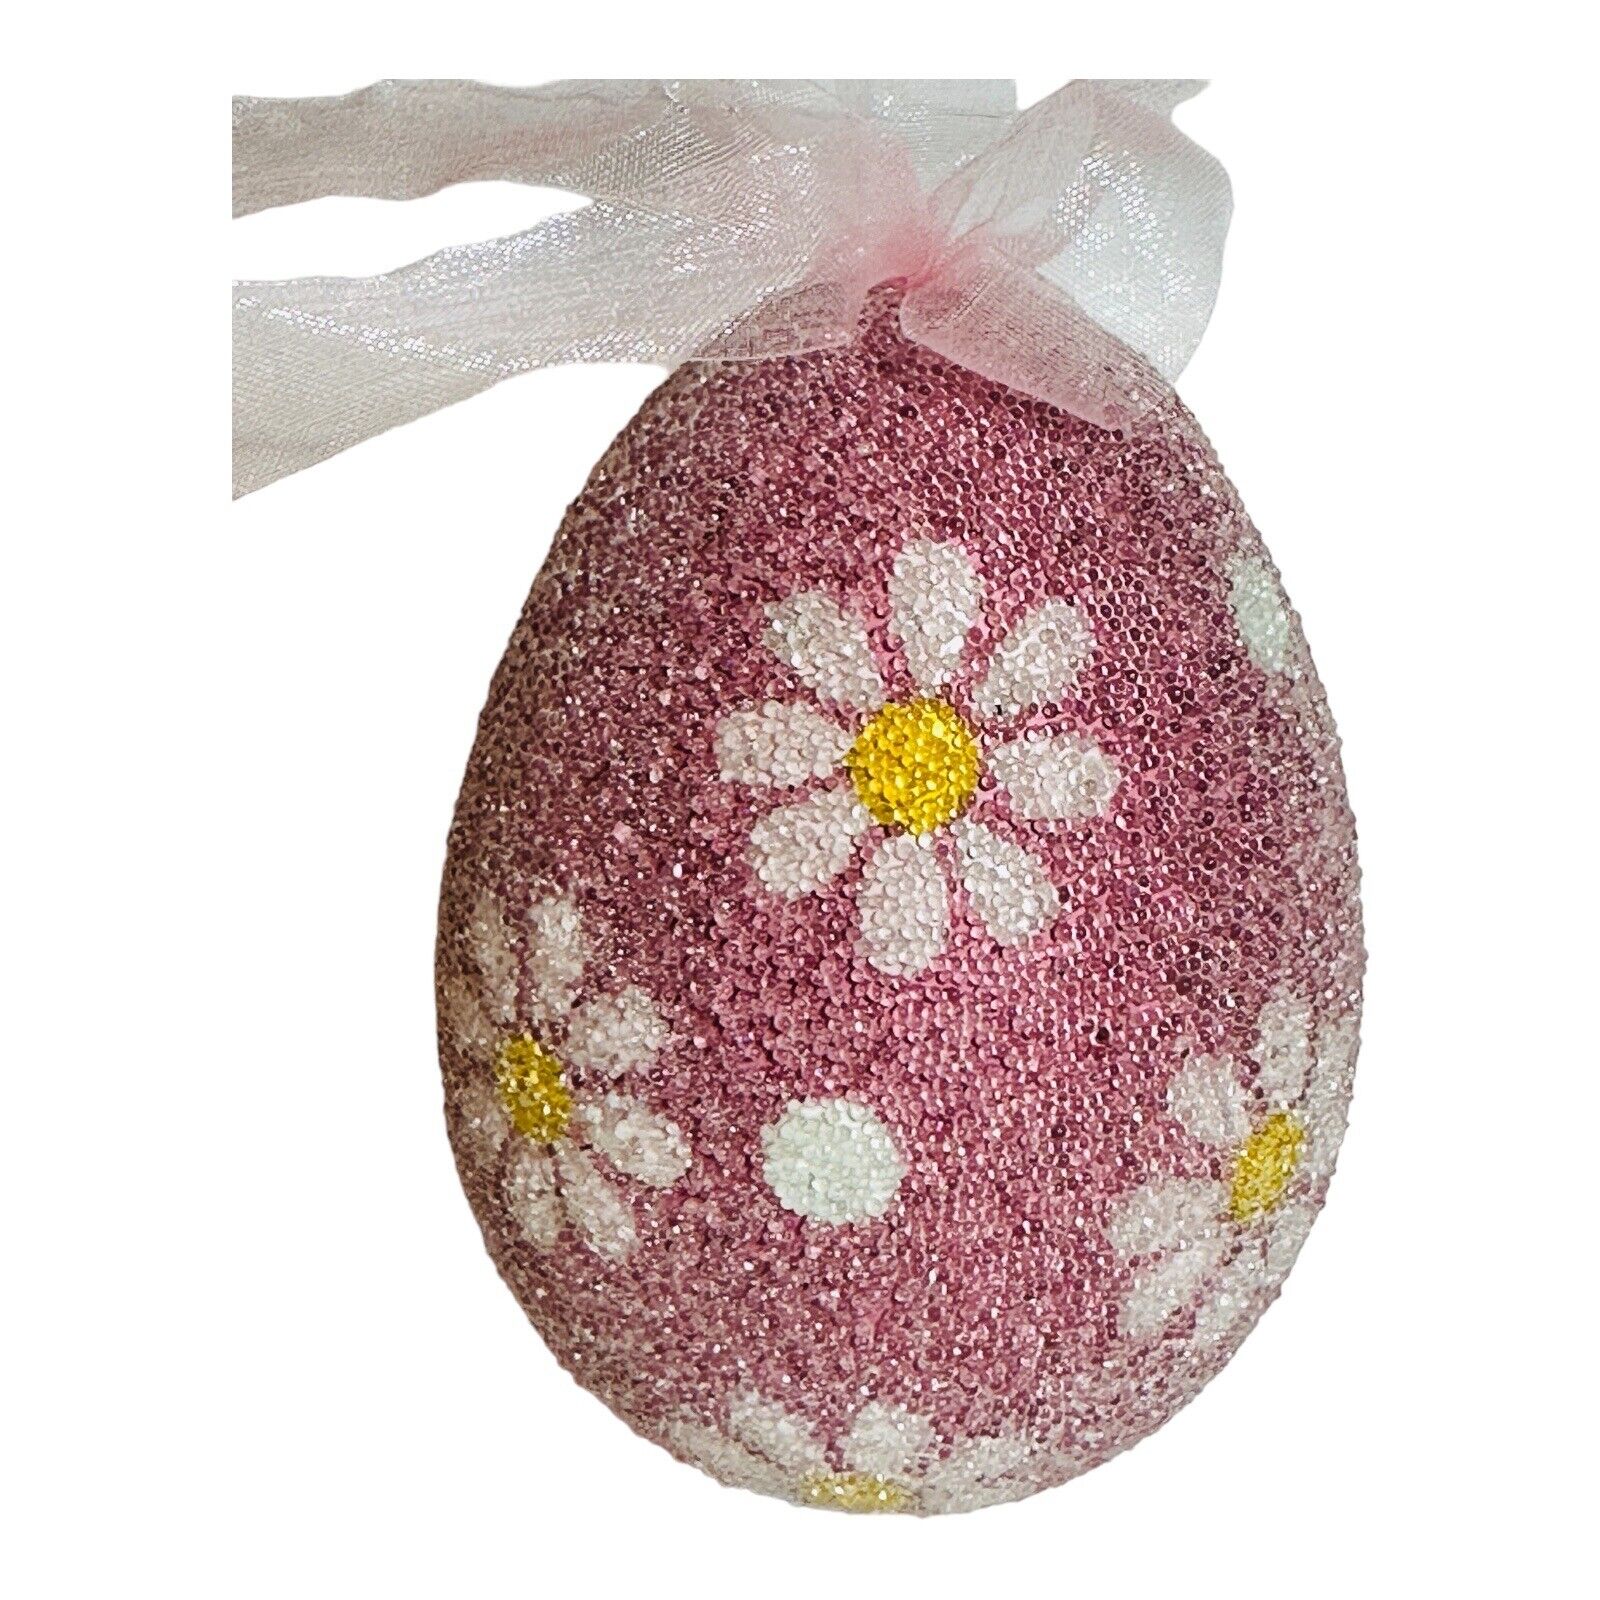 Frosted Sugared Easter Egg Pink Daisy Floral Tree Ornament Decor Ribbon 3.5” H